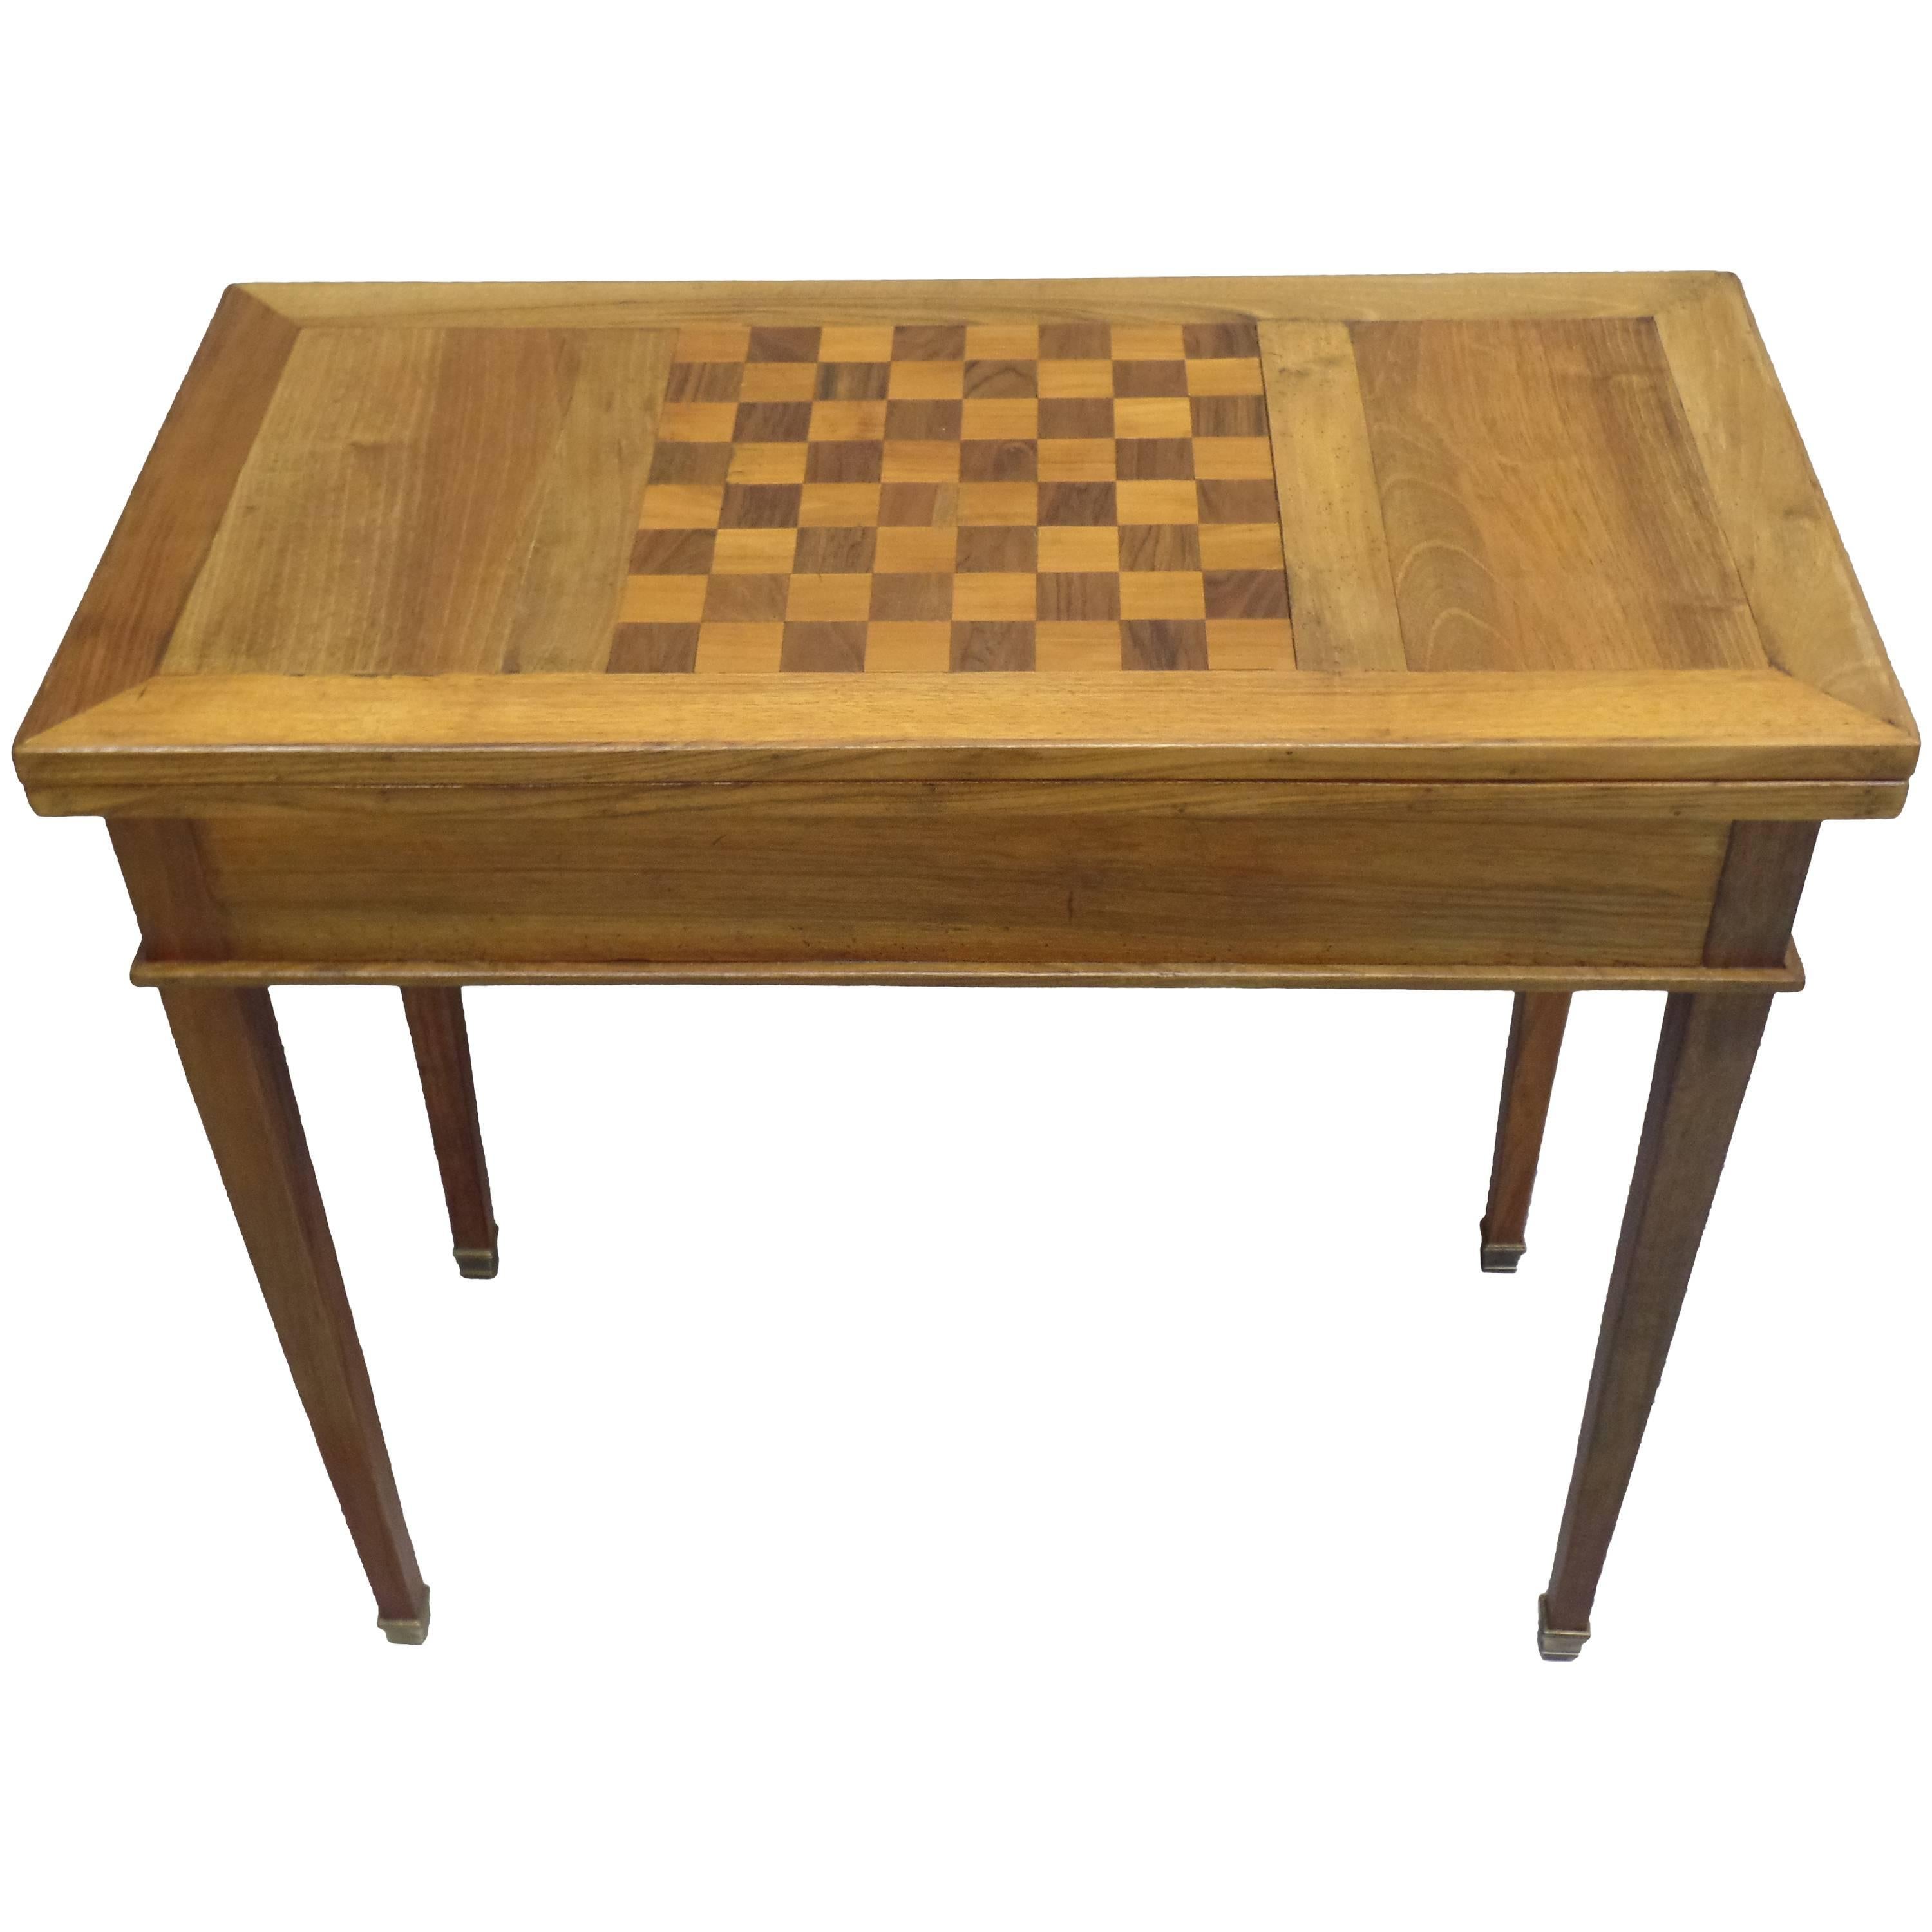 French Modern Neoclassical Louis XVI Game Table or Writing Desk by Maison Jansen For Sale